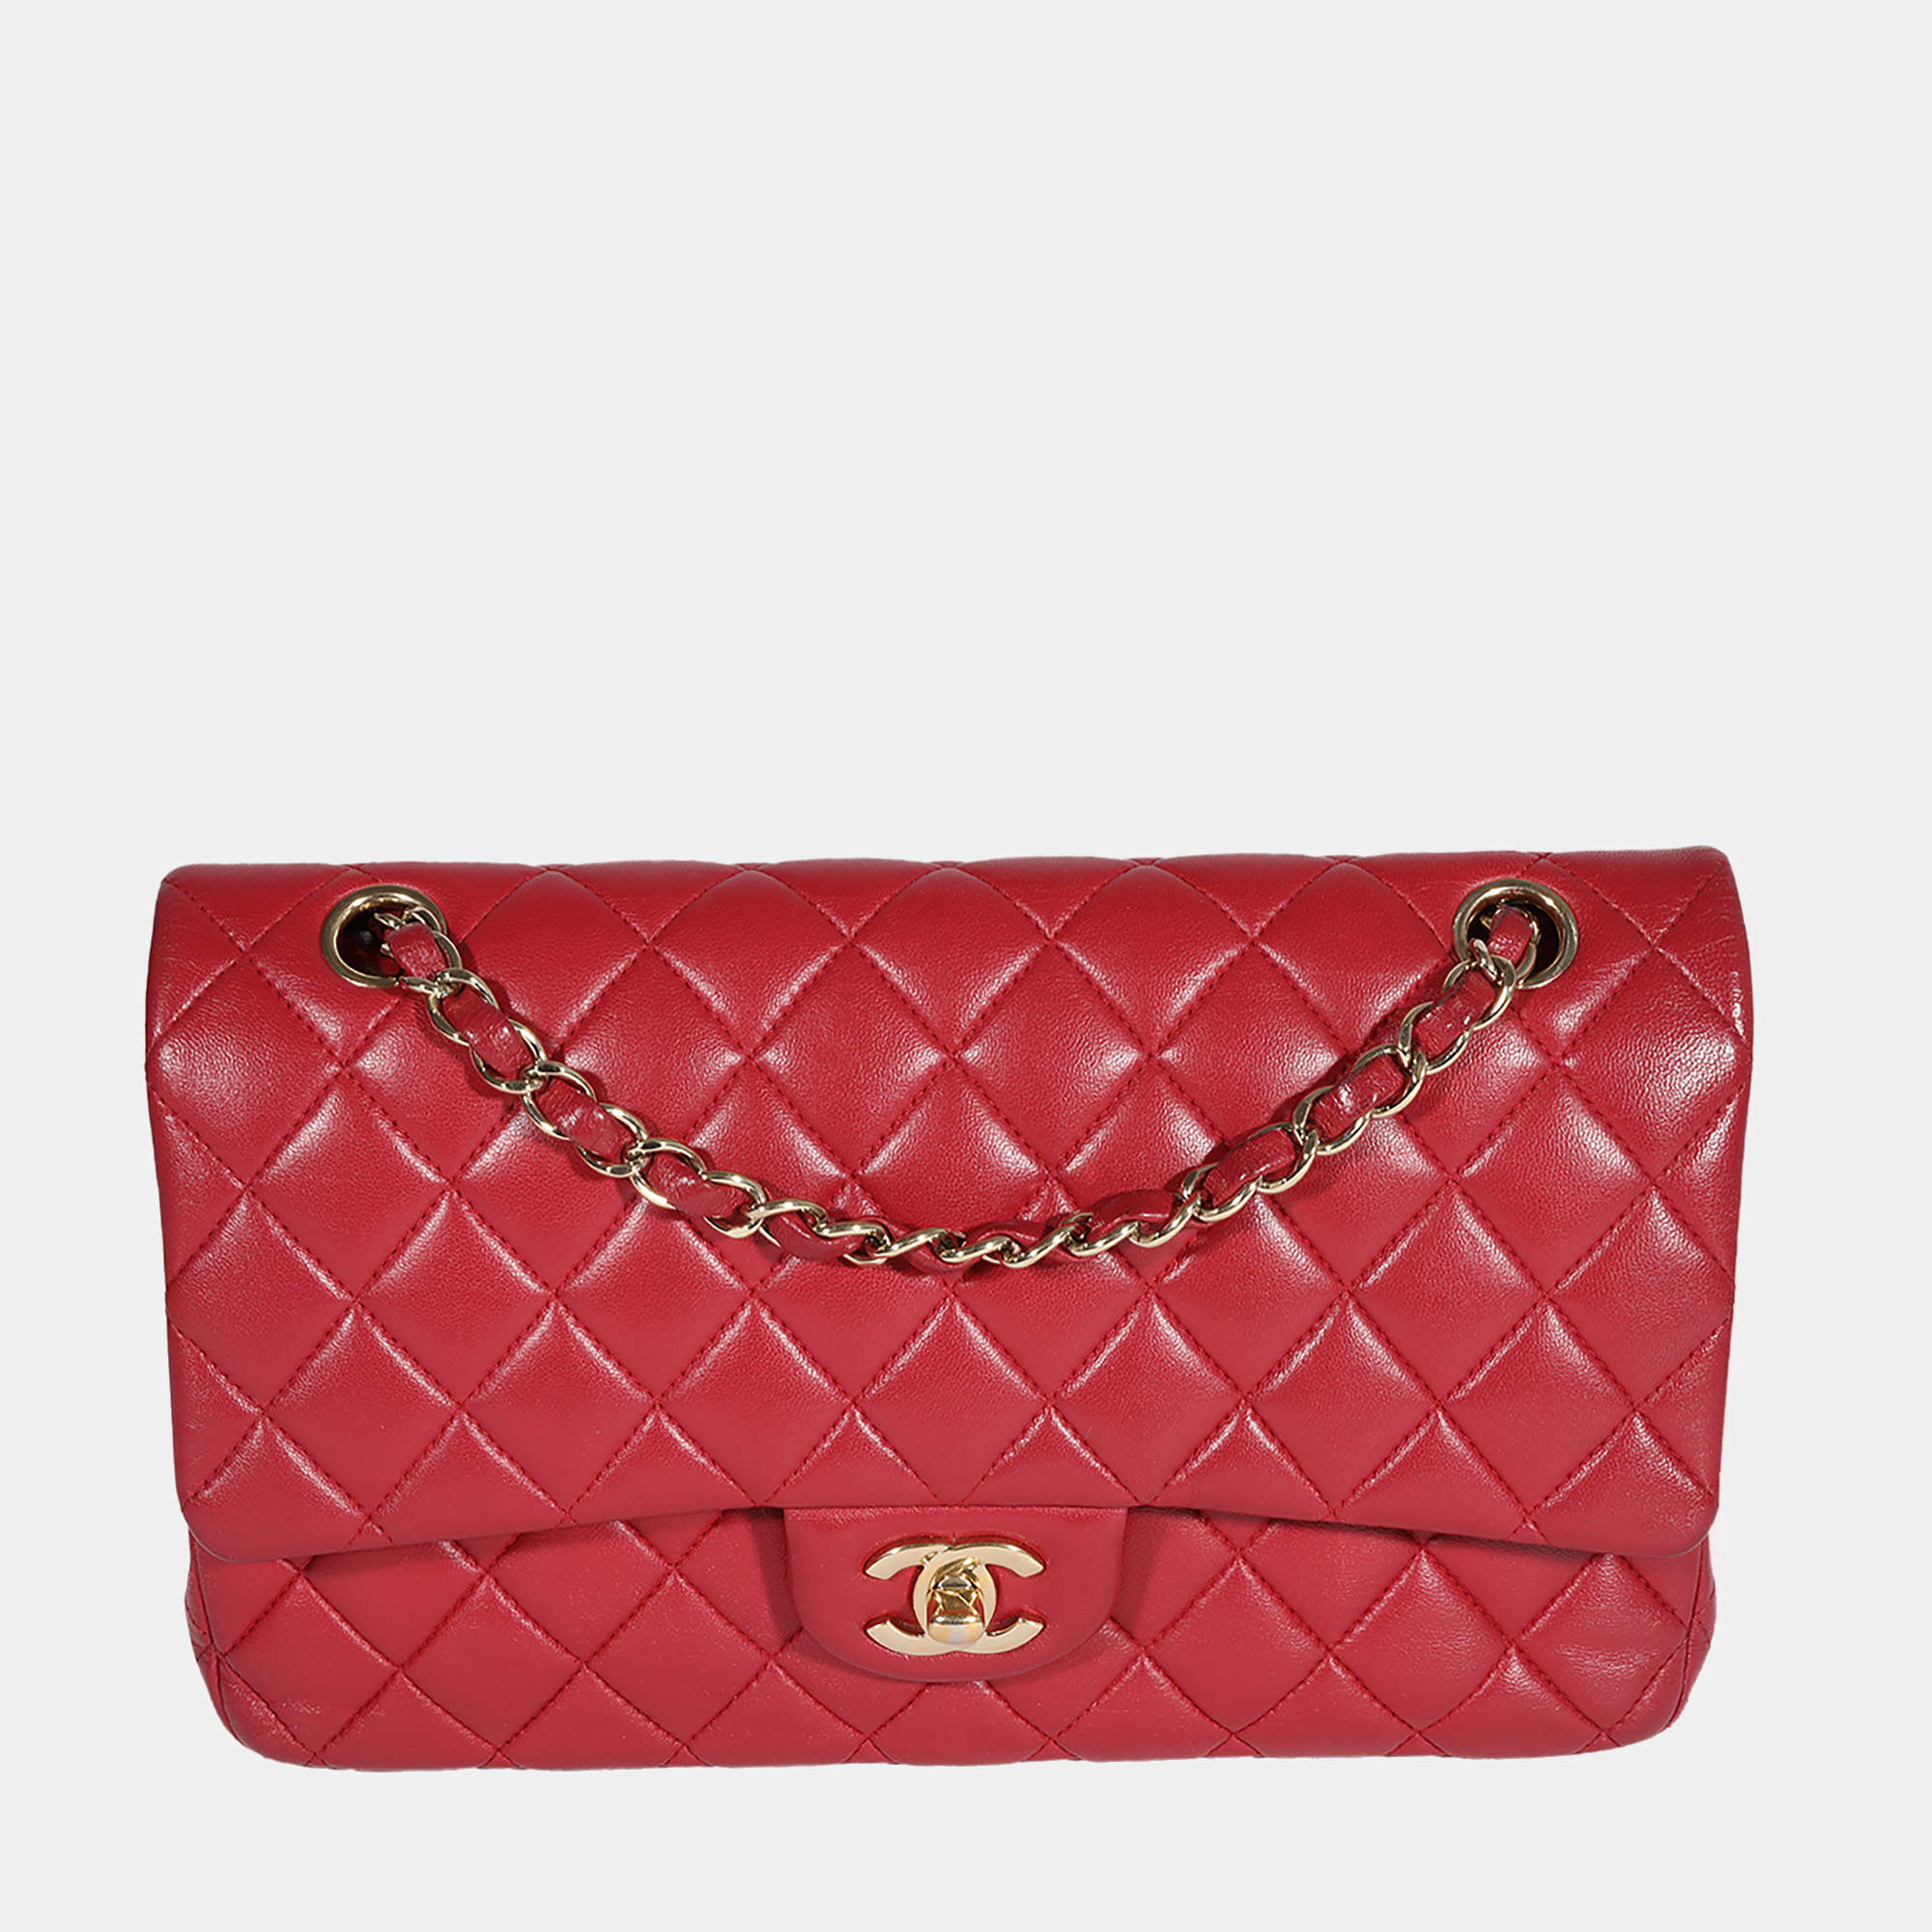 classic chanel red bag